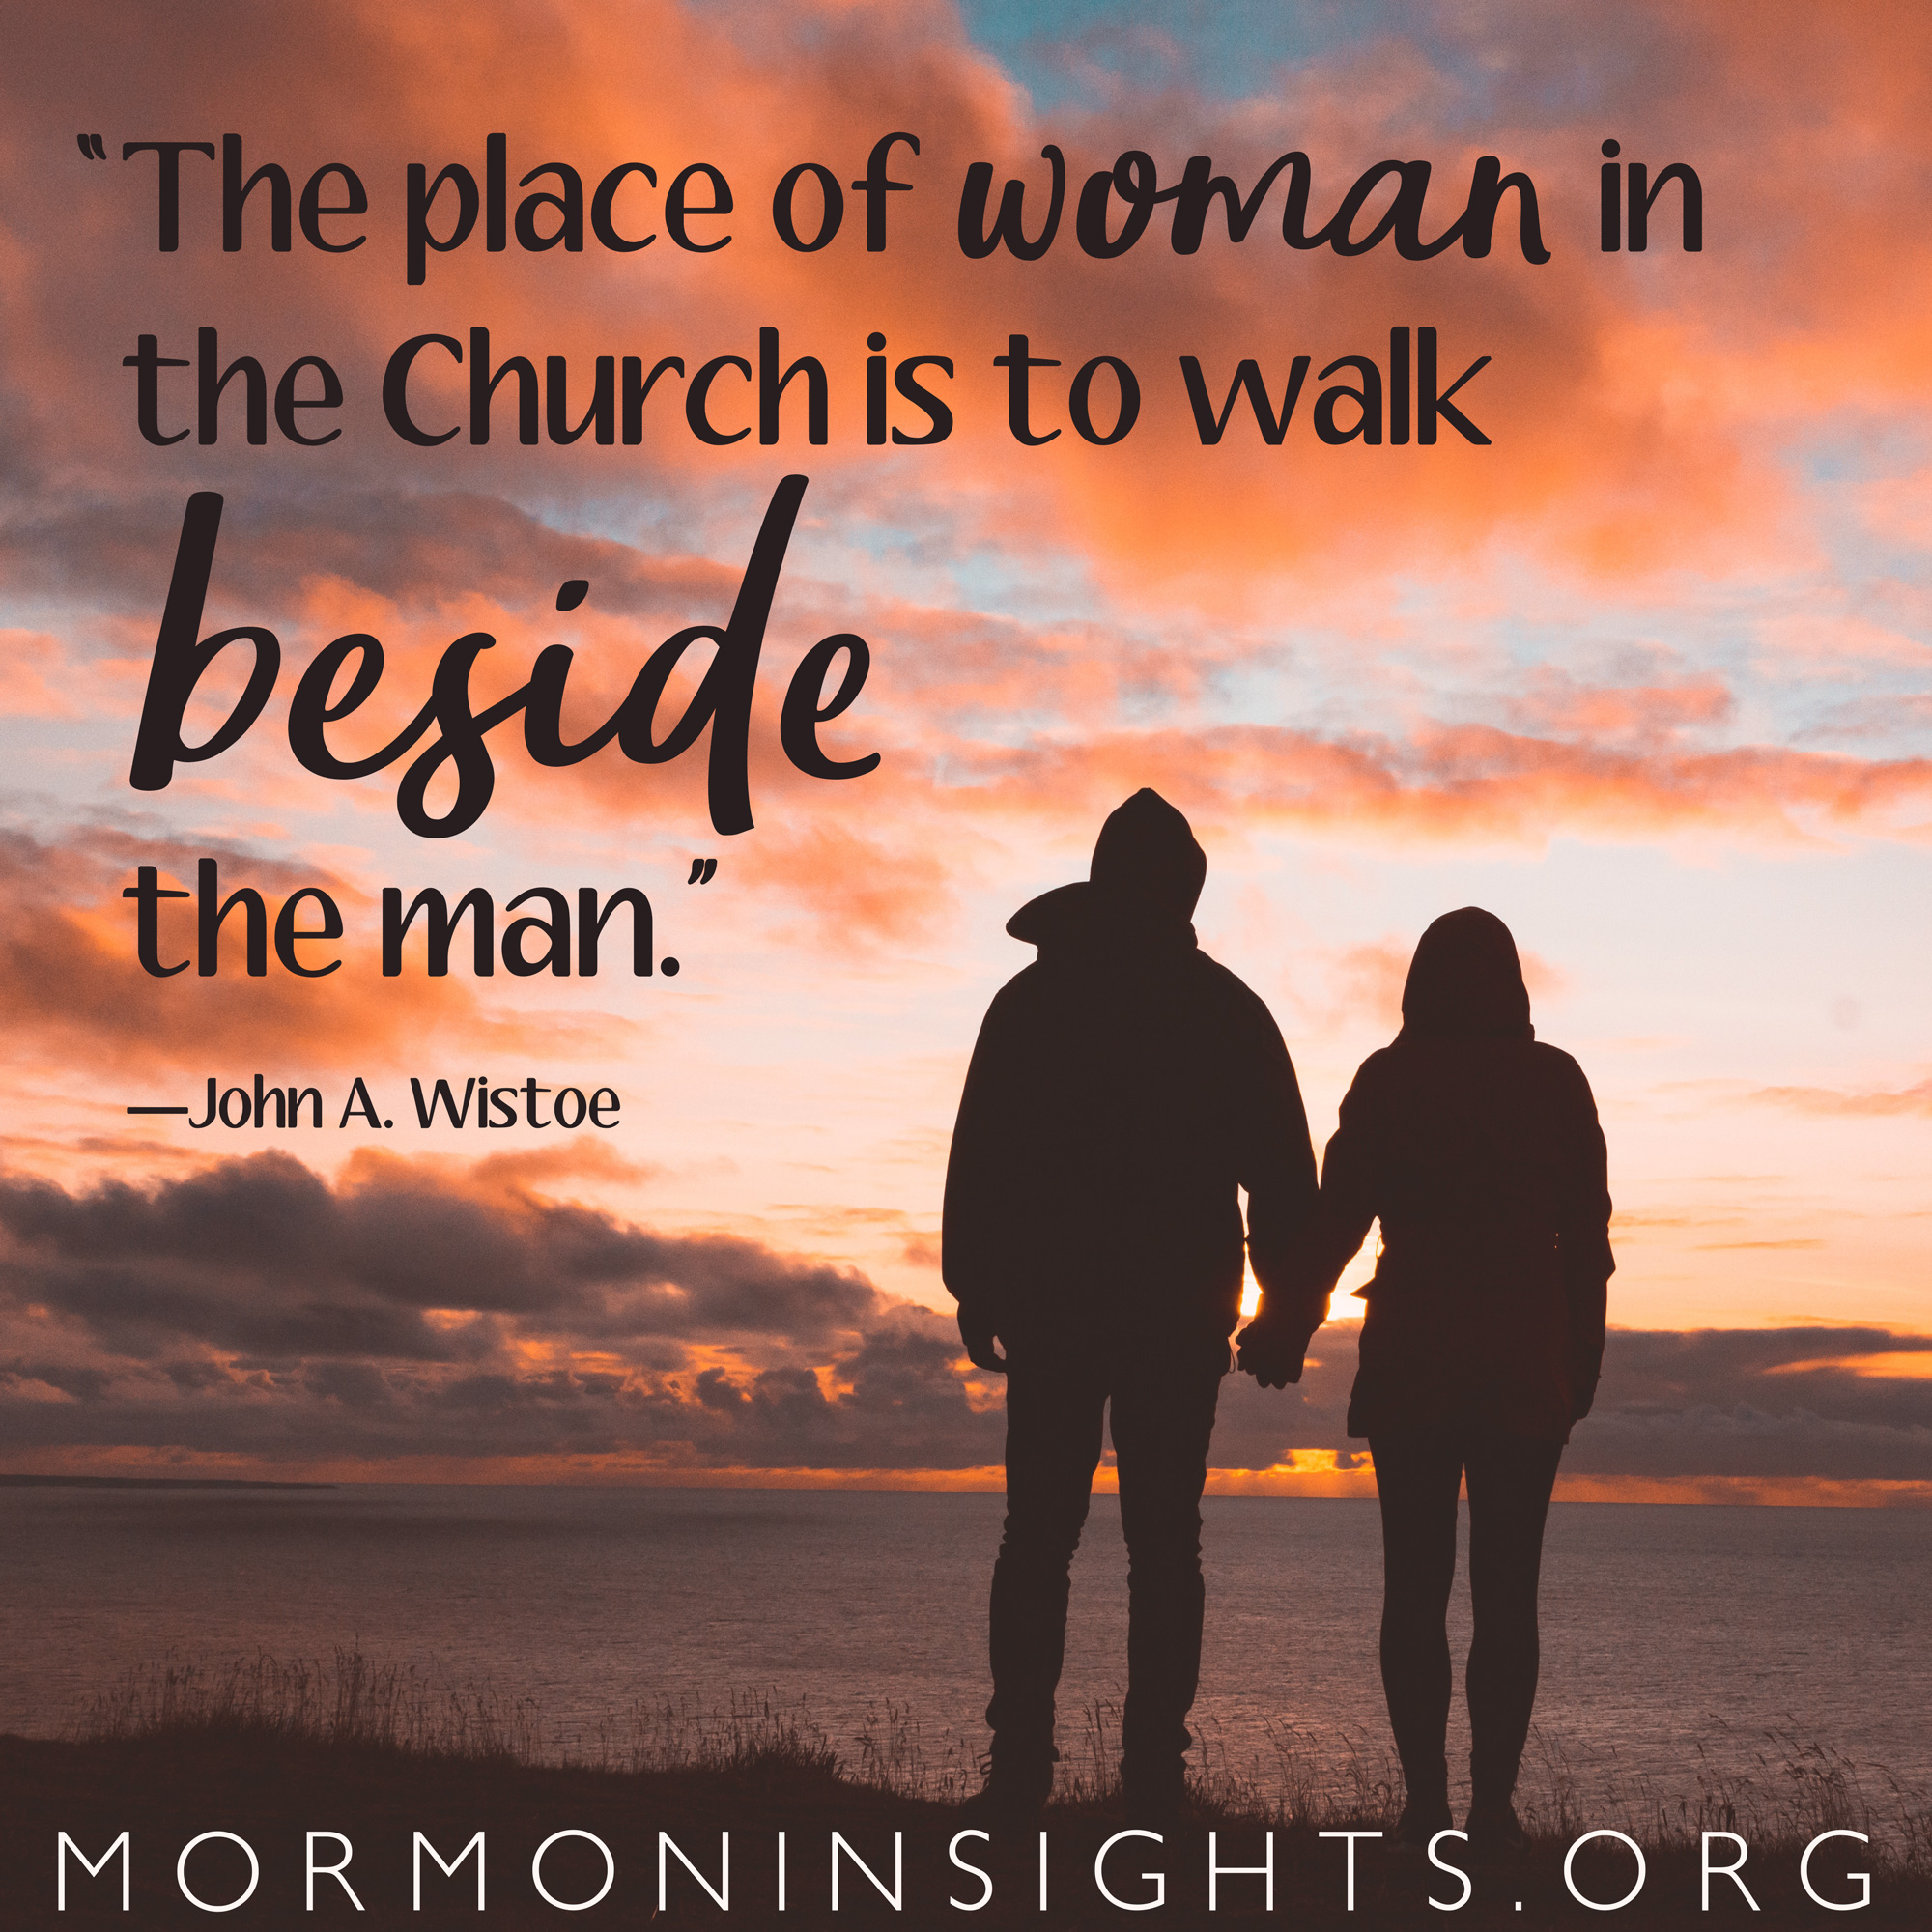 "The place of woman in the Church is to walk beside the man."—John A. Wistoe